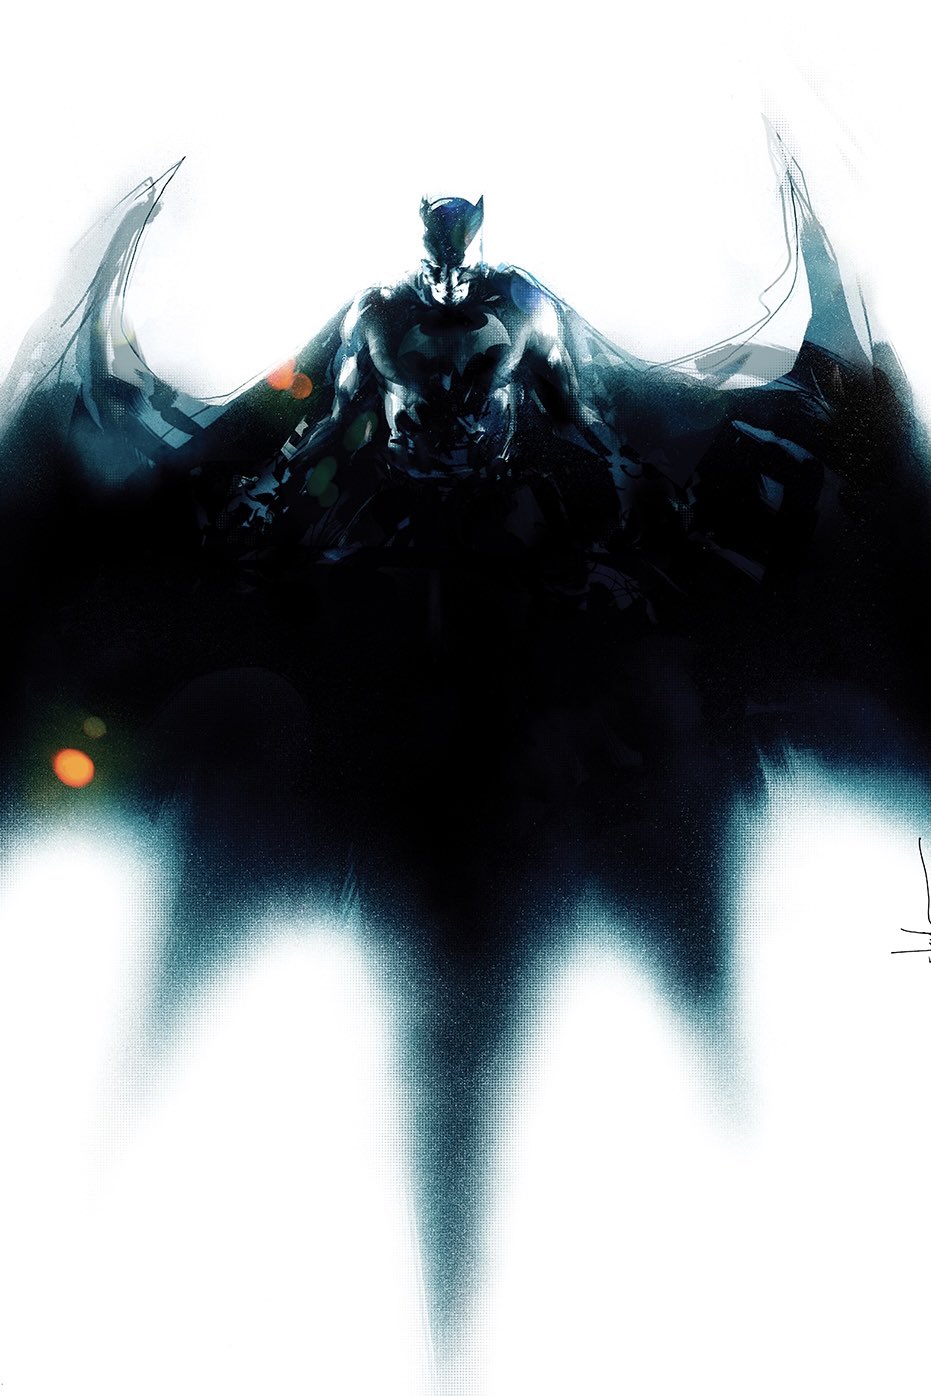 Batman With Wings Wallpapers